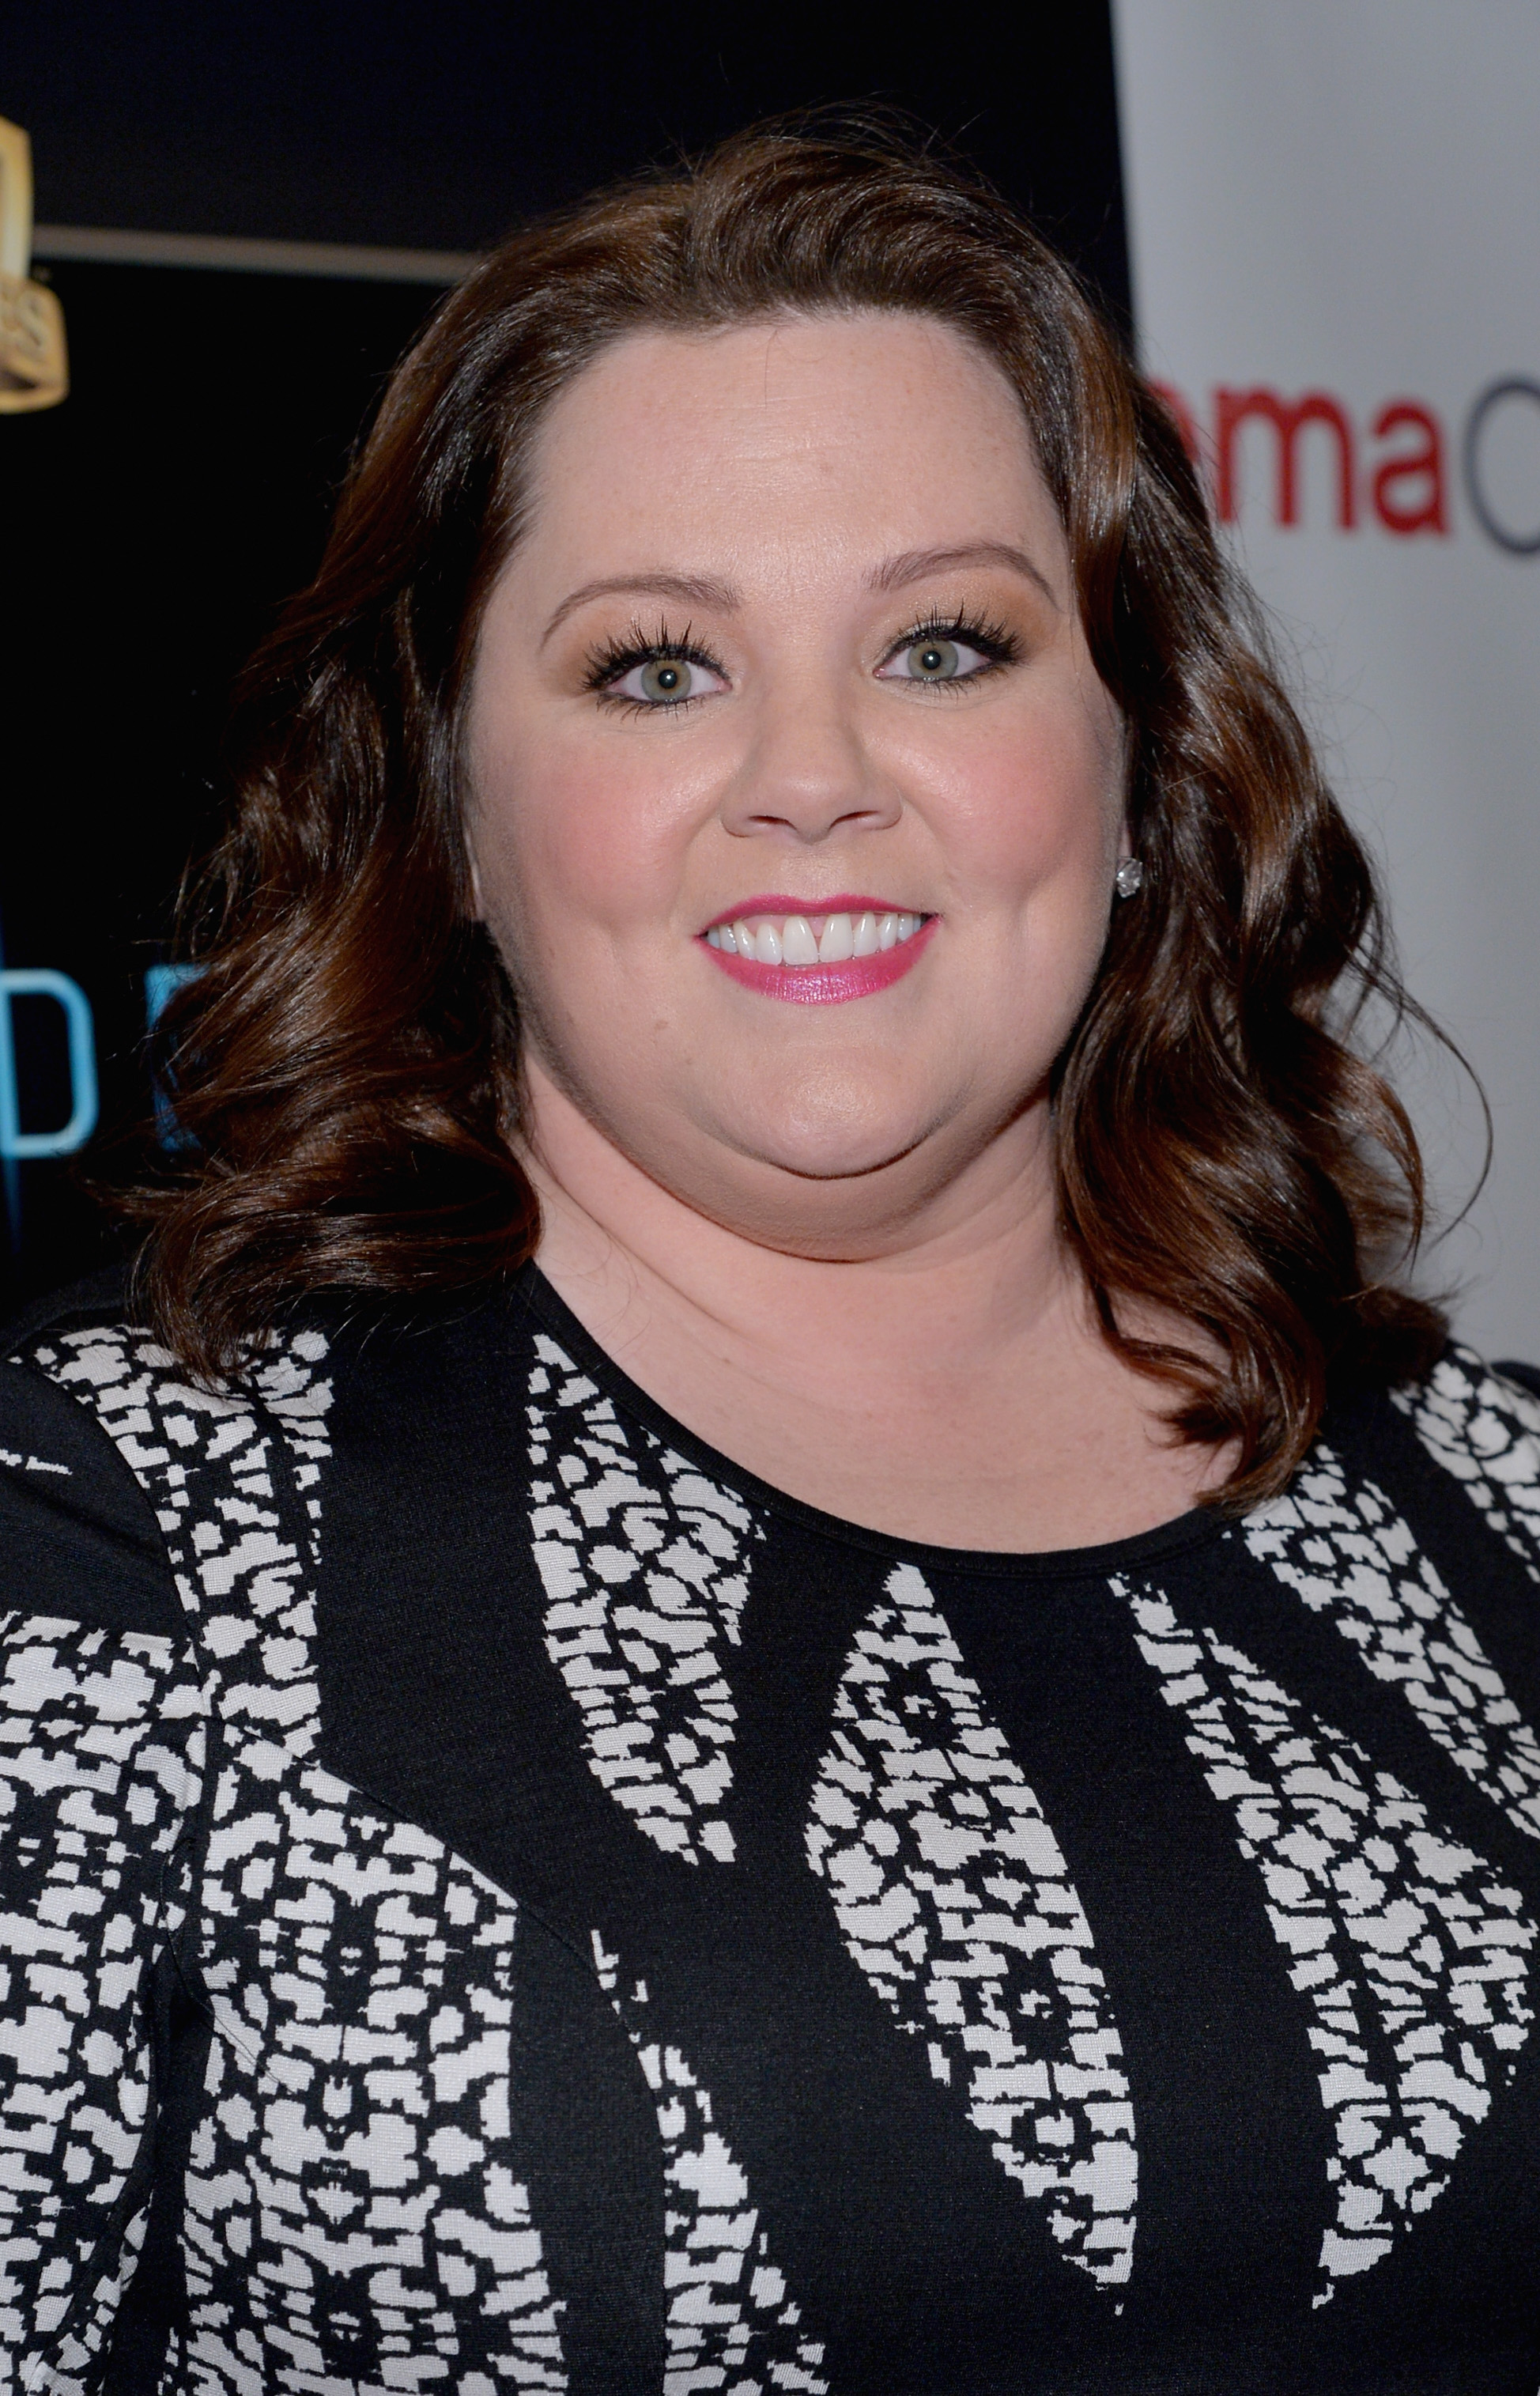 Actress Melissa McCarthy attends Warner Bros. Pictures' The Big Picture at The Colosseum at Caesars Palace on March 27, 2014 in Las Vegas, Nevada. (Alberto E. Rodriguez—Getty Images)